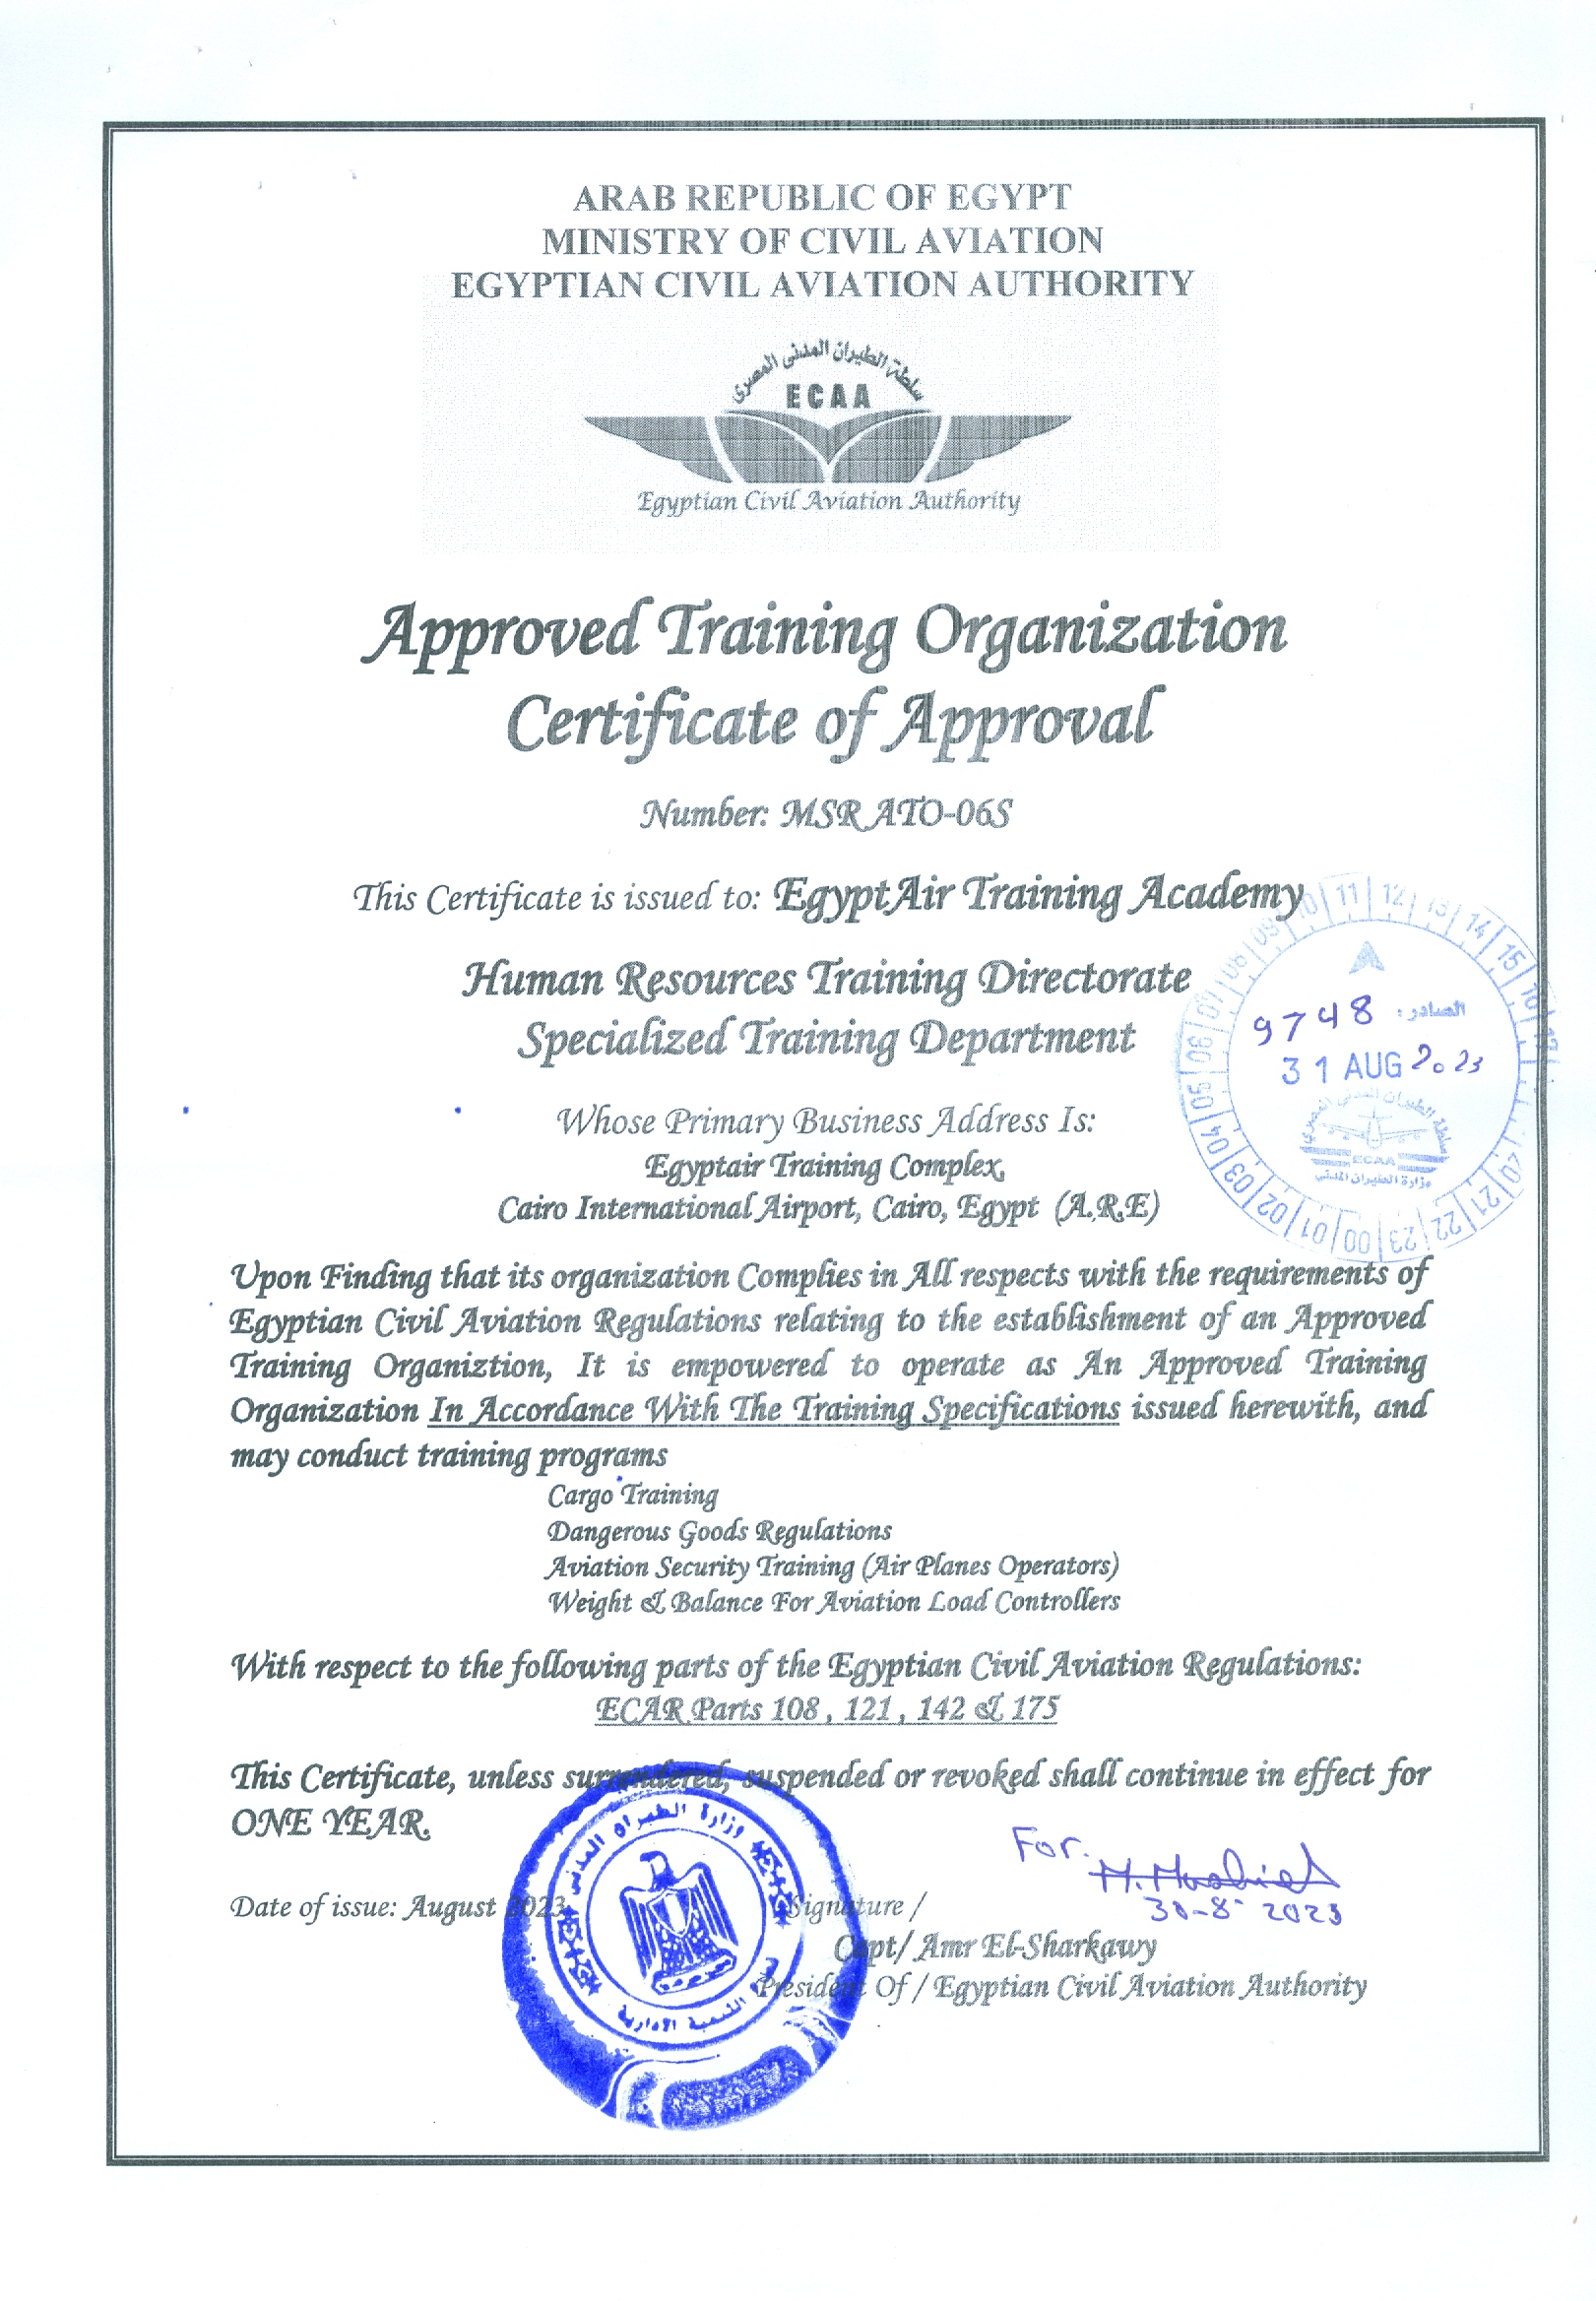 HR Training - Specialized Training Department